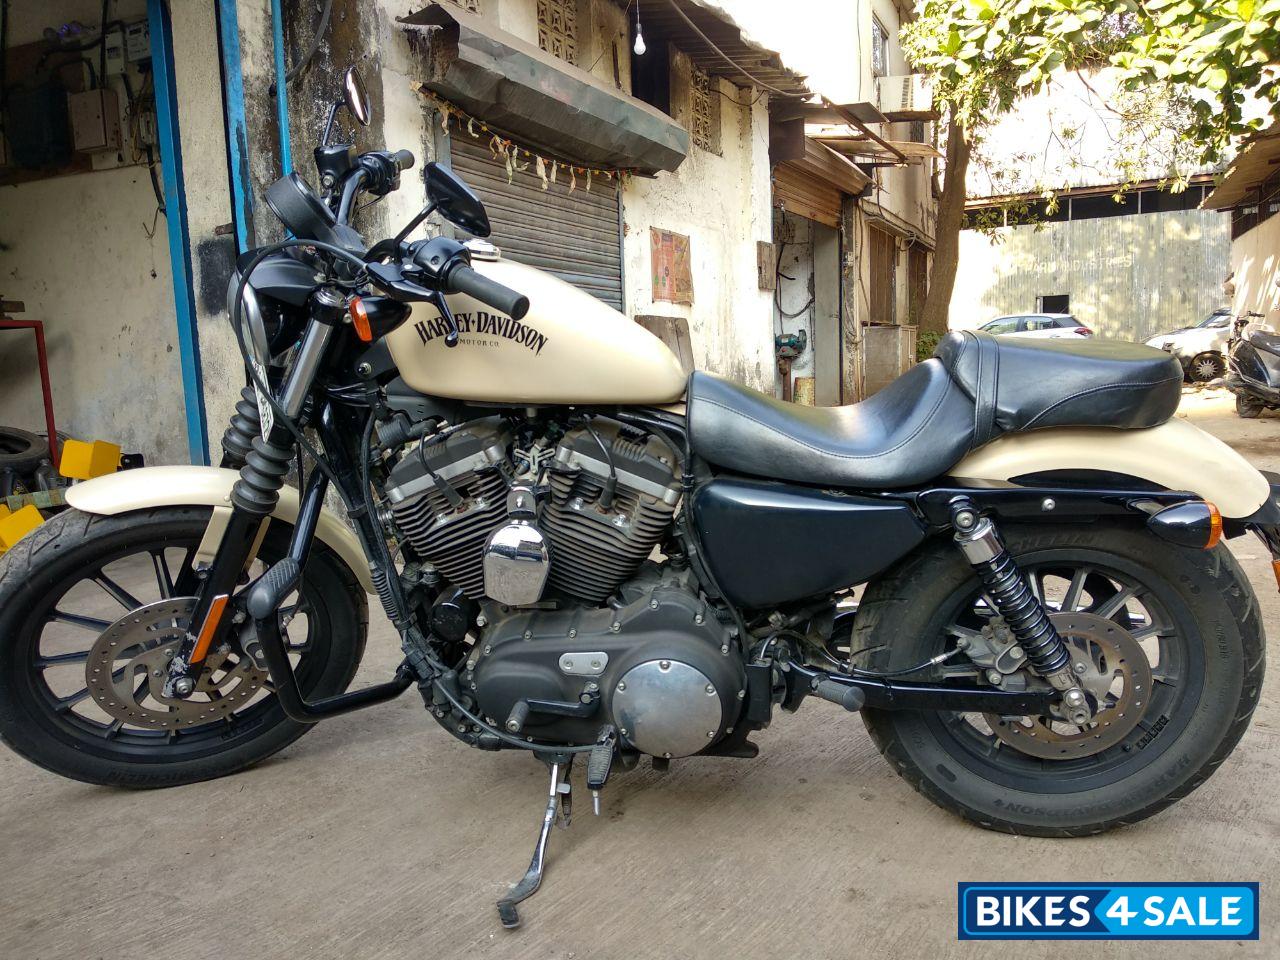 Used 2014 Model Harley Davidson Iron 883 For Sale In Thane Id 188866 Sand Camo Colour Bikes4sale